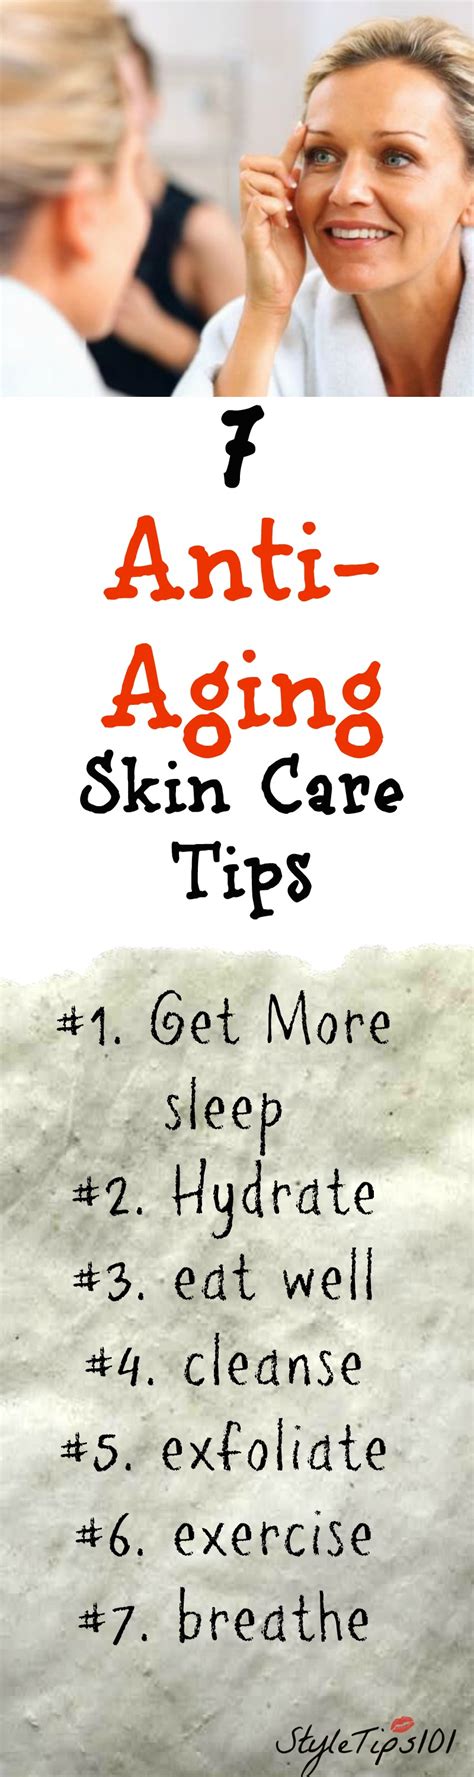 With so many skin care products out there, how do you know which works best to fight the look of aging? 7 Anti-Aging Skin Care Tips